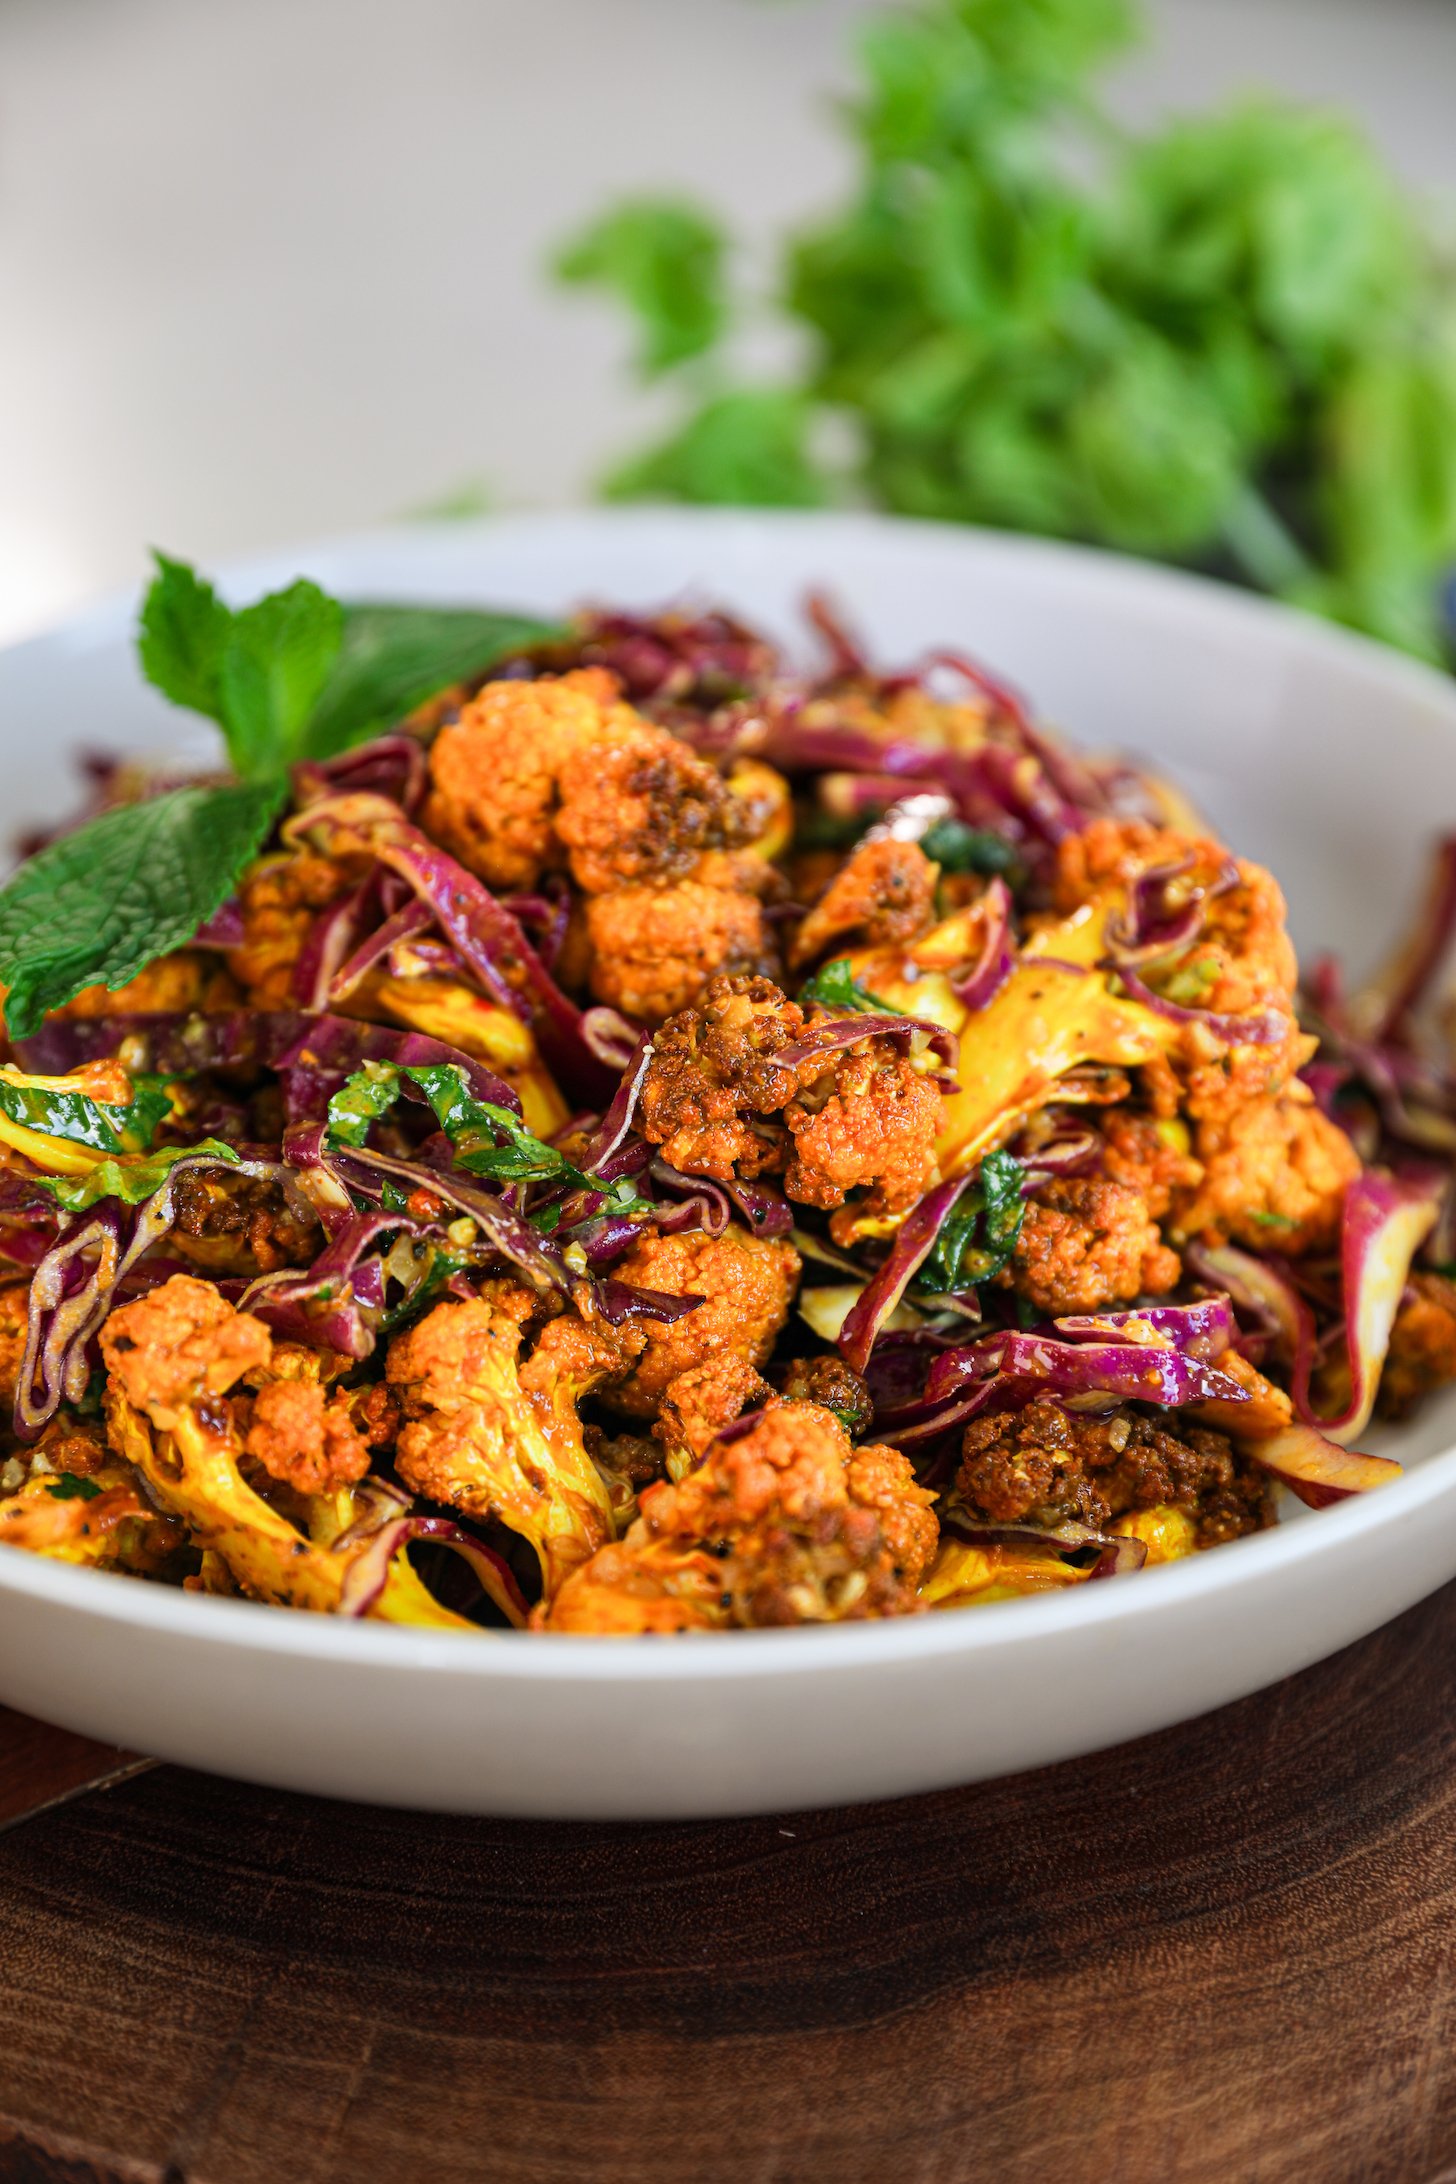 Side image of a bowl of spicy cauliflower and shredded red cabbage salad topped with a sprig of mint and a green plant in the background.